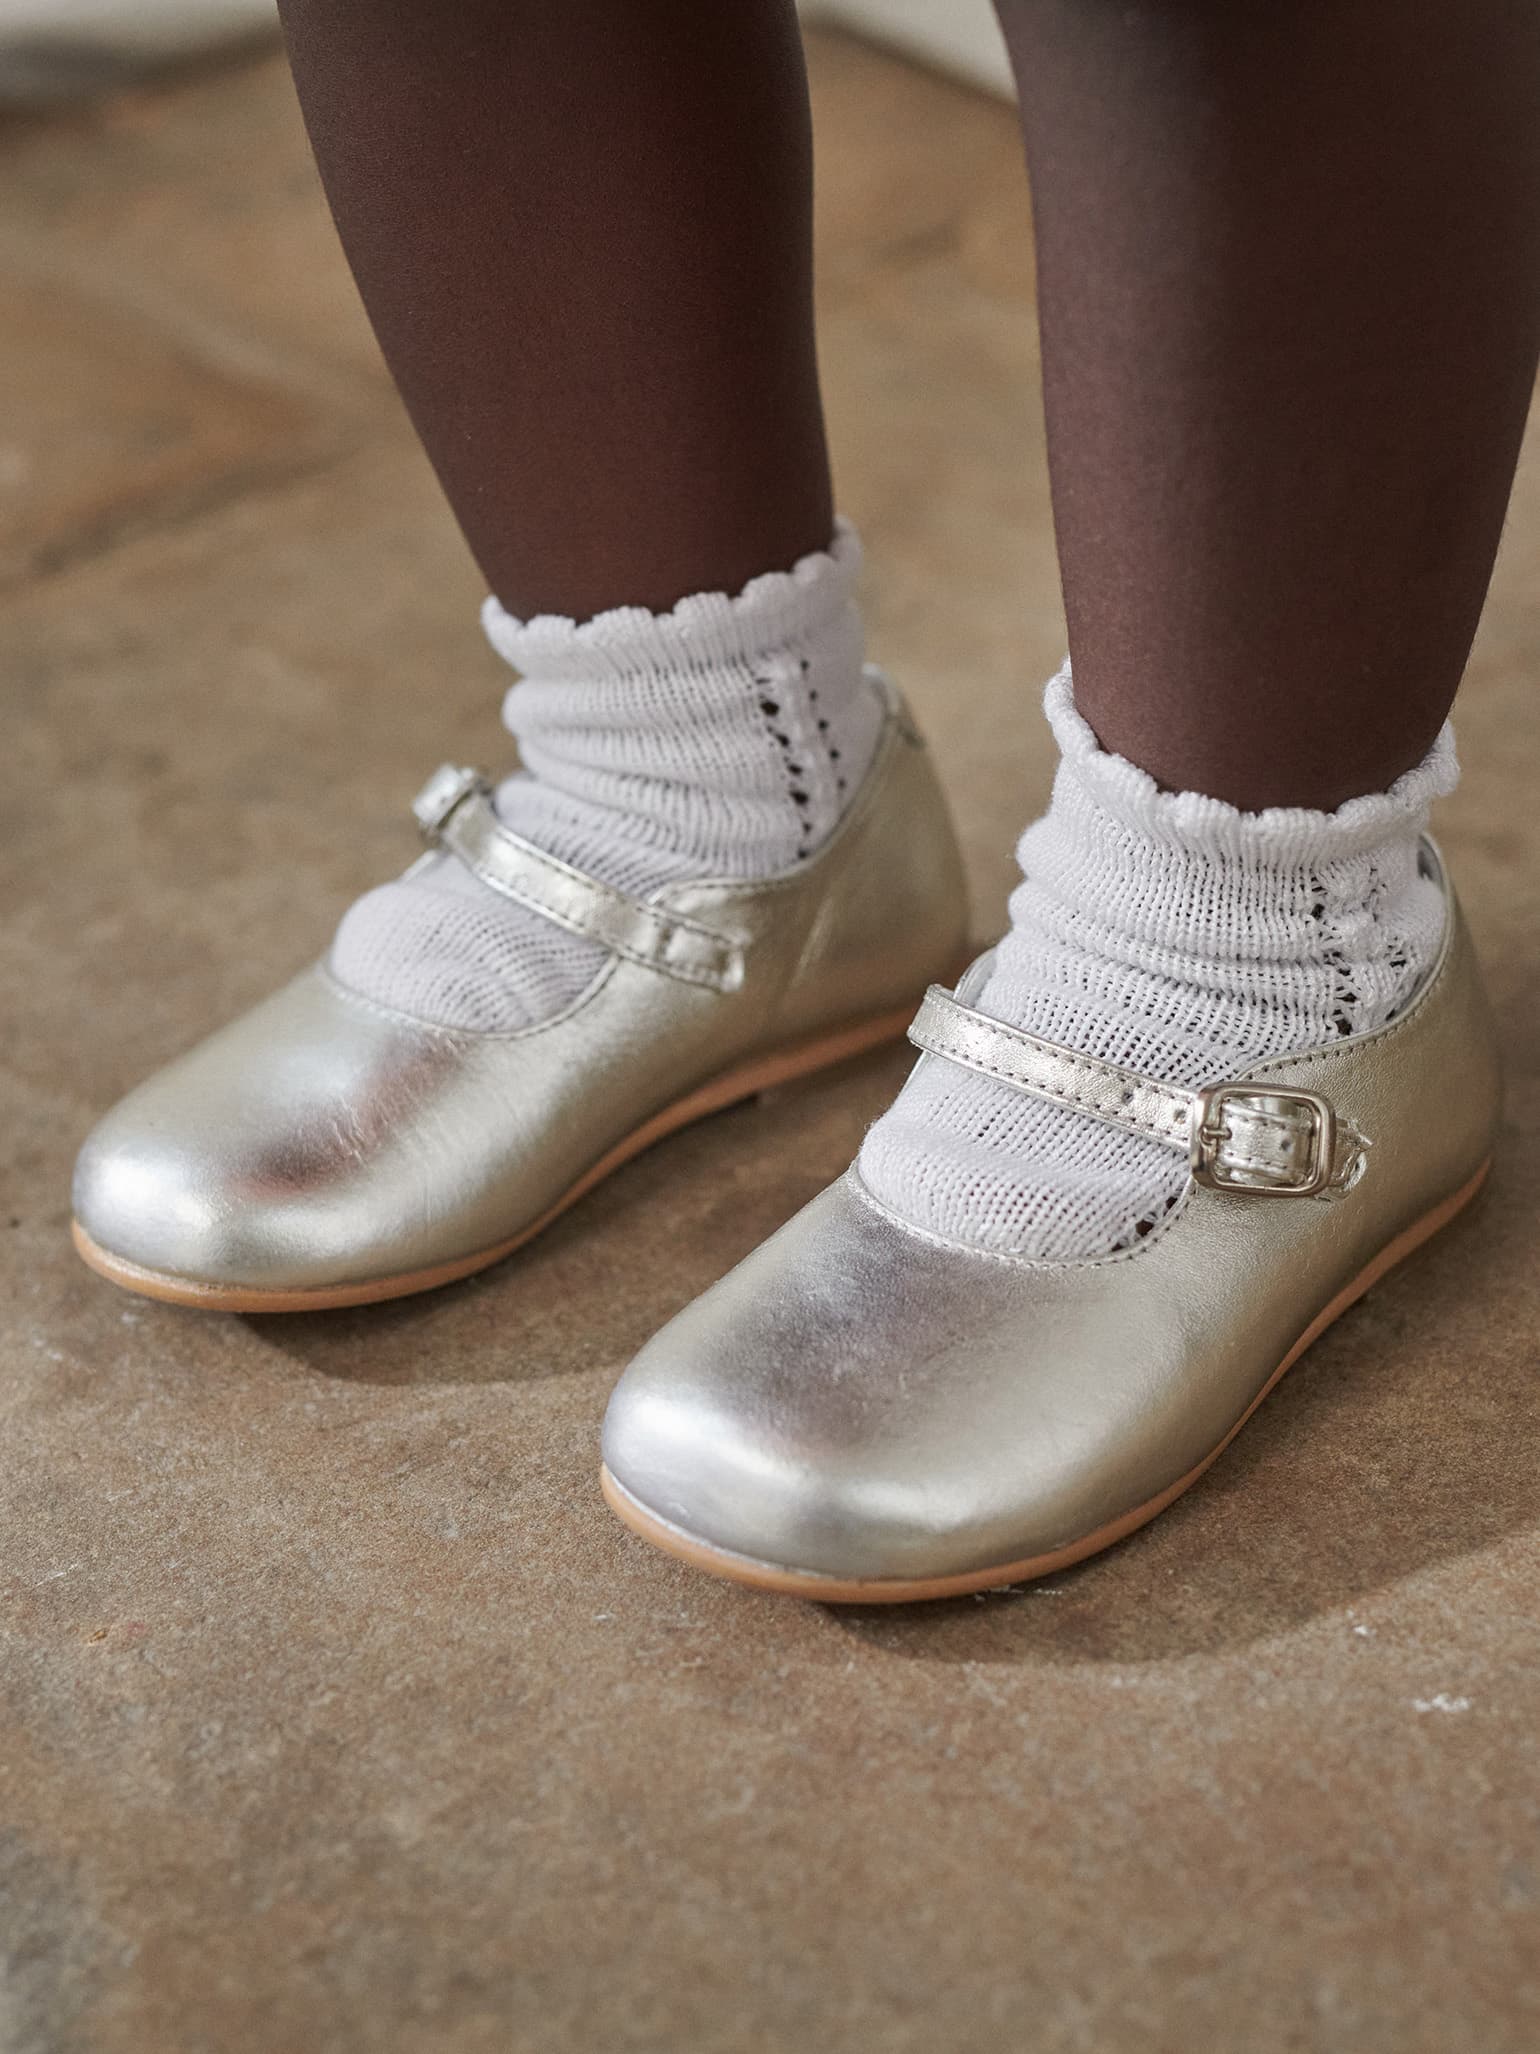 Baby Emporio-Baby girl tights leggings with Mary Jane shoe  look-sparkle-cotton-comfort waist-0-6 Months - CLASSIC GOLD 